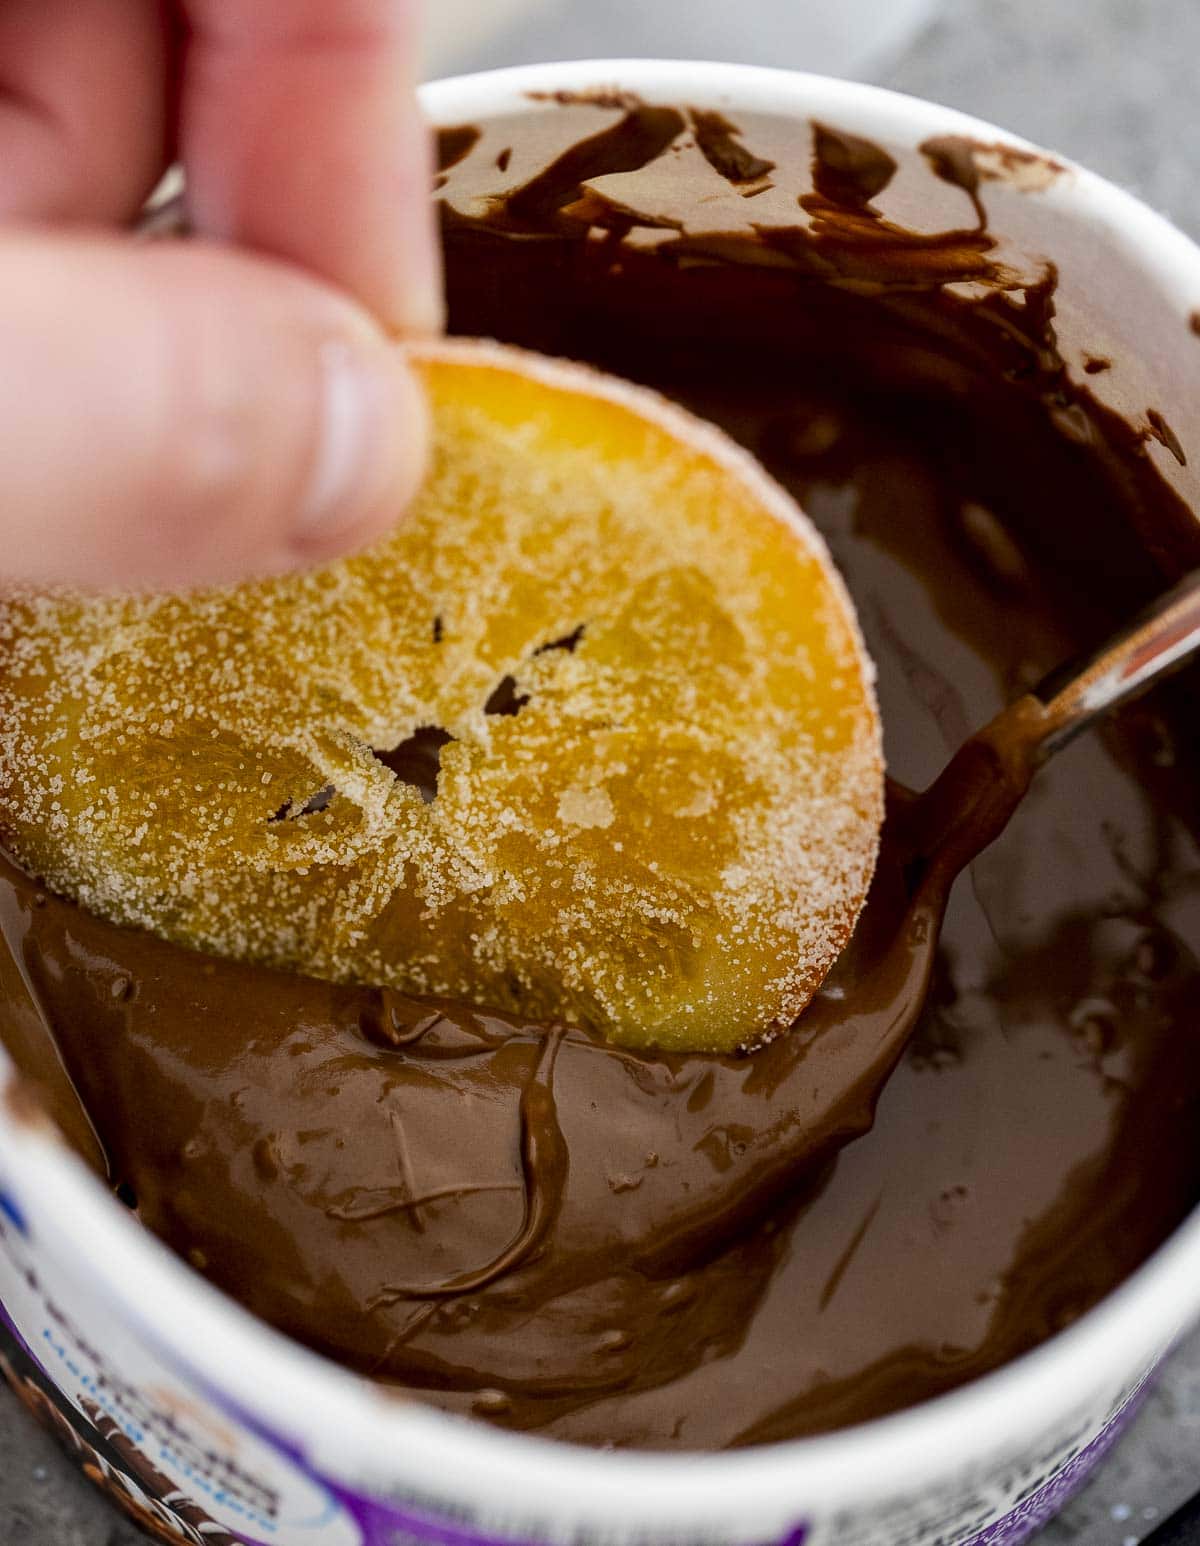 A sugar coated orange slice being dipped in chocolate.